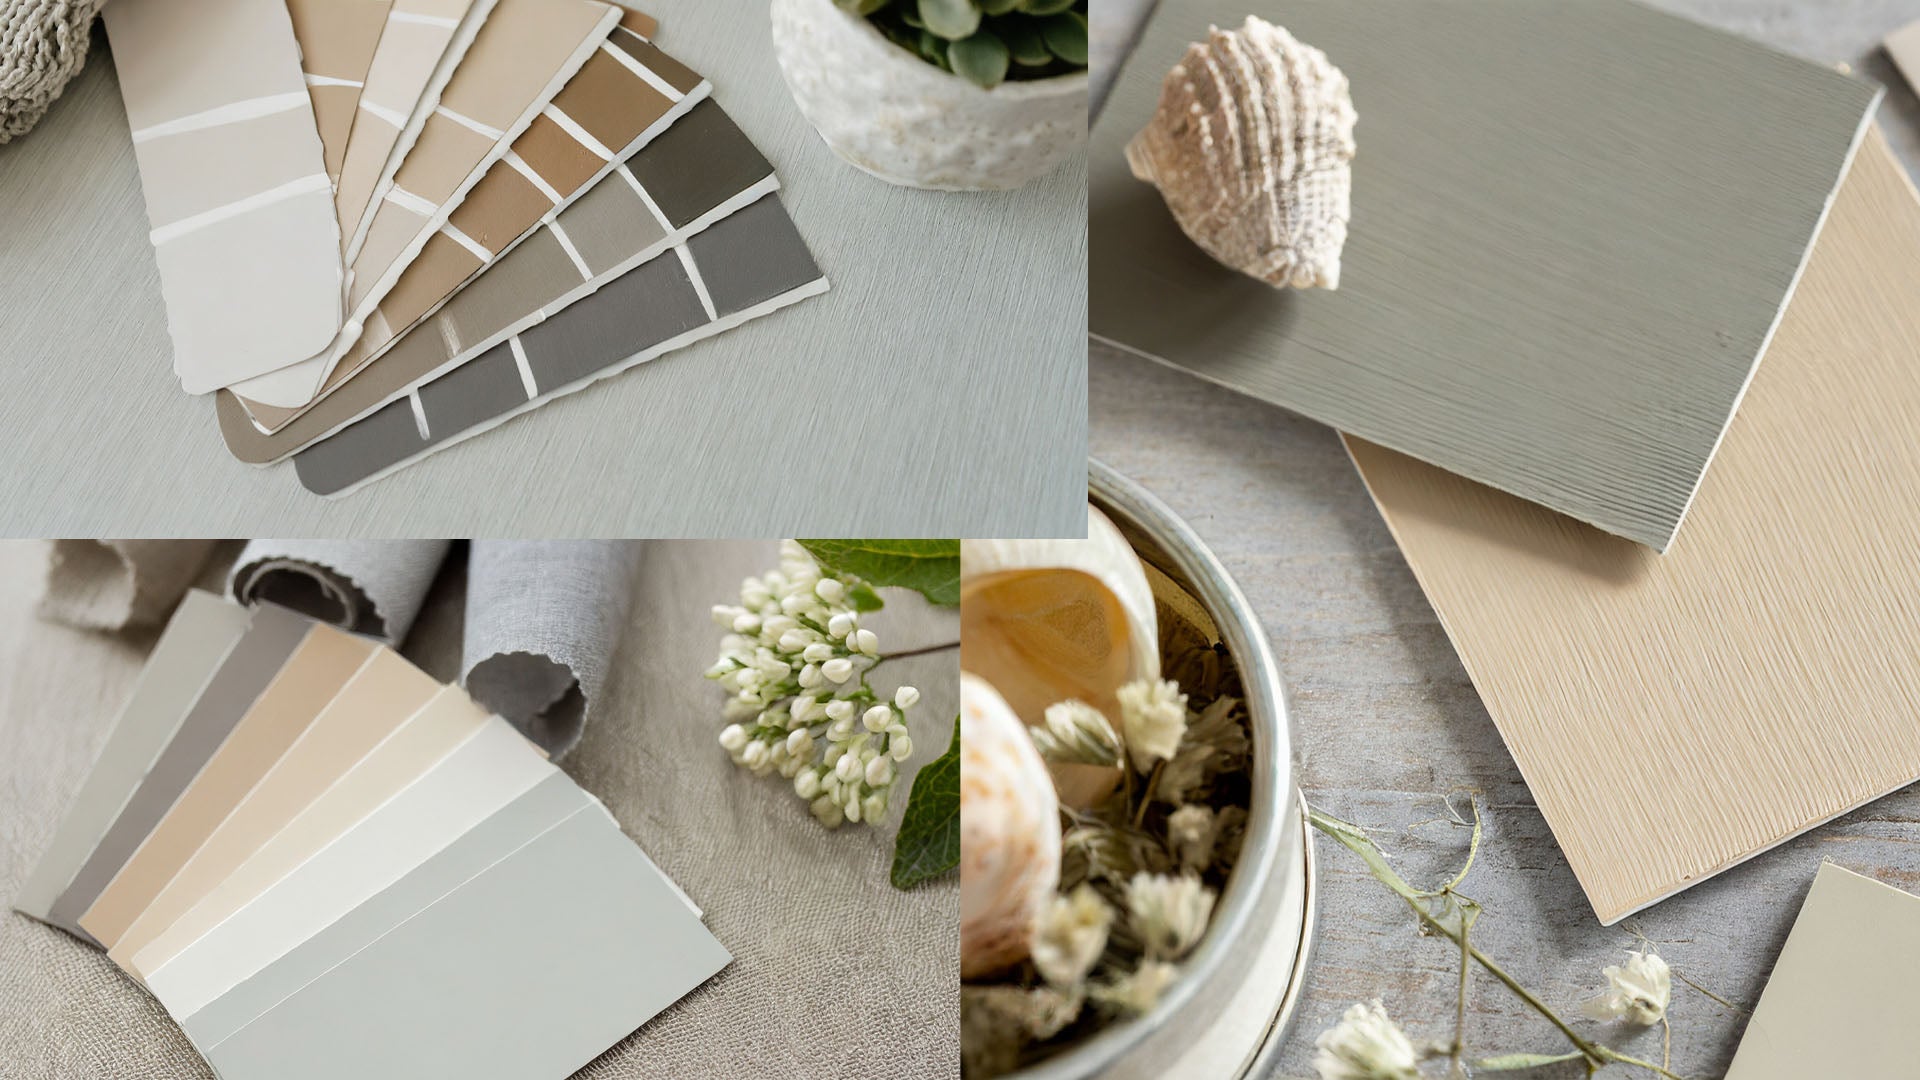 Neutral colored paint swatches and fabric swatches collage.